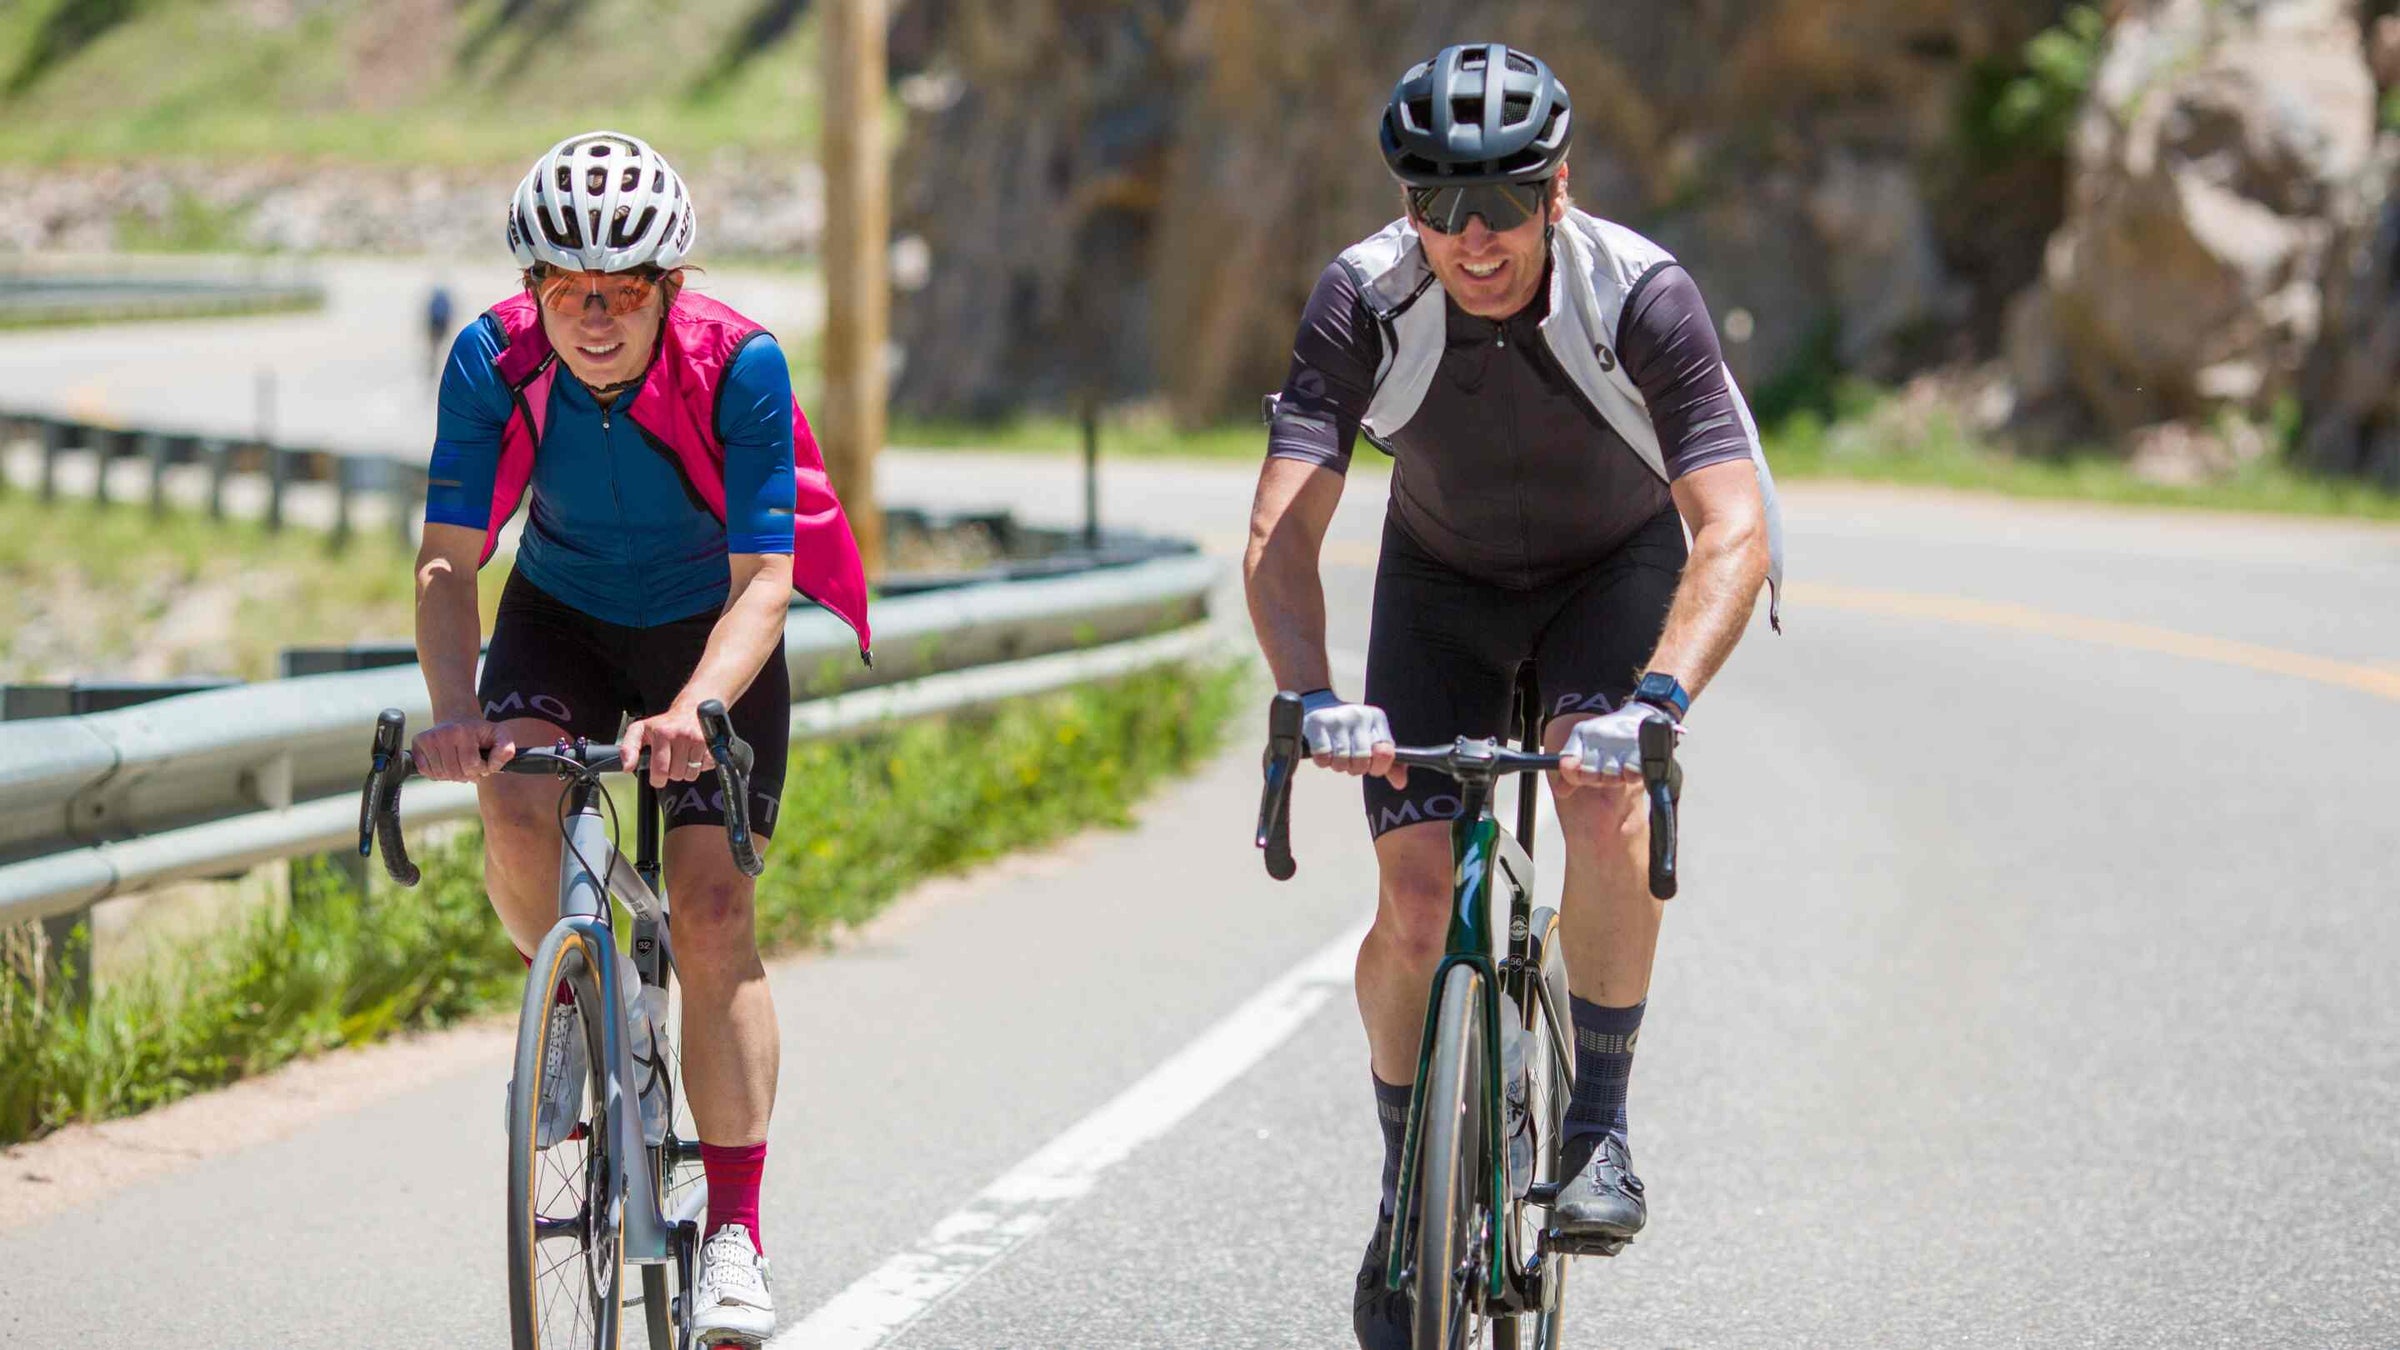 Cyclists in Vests Riding on the Road